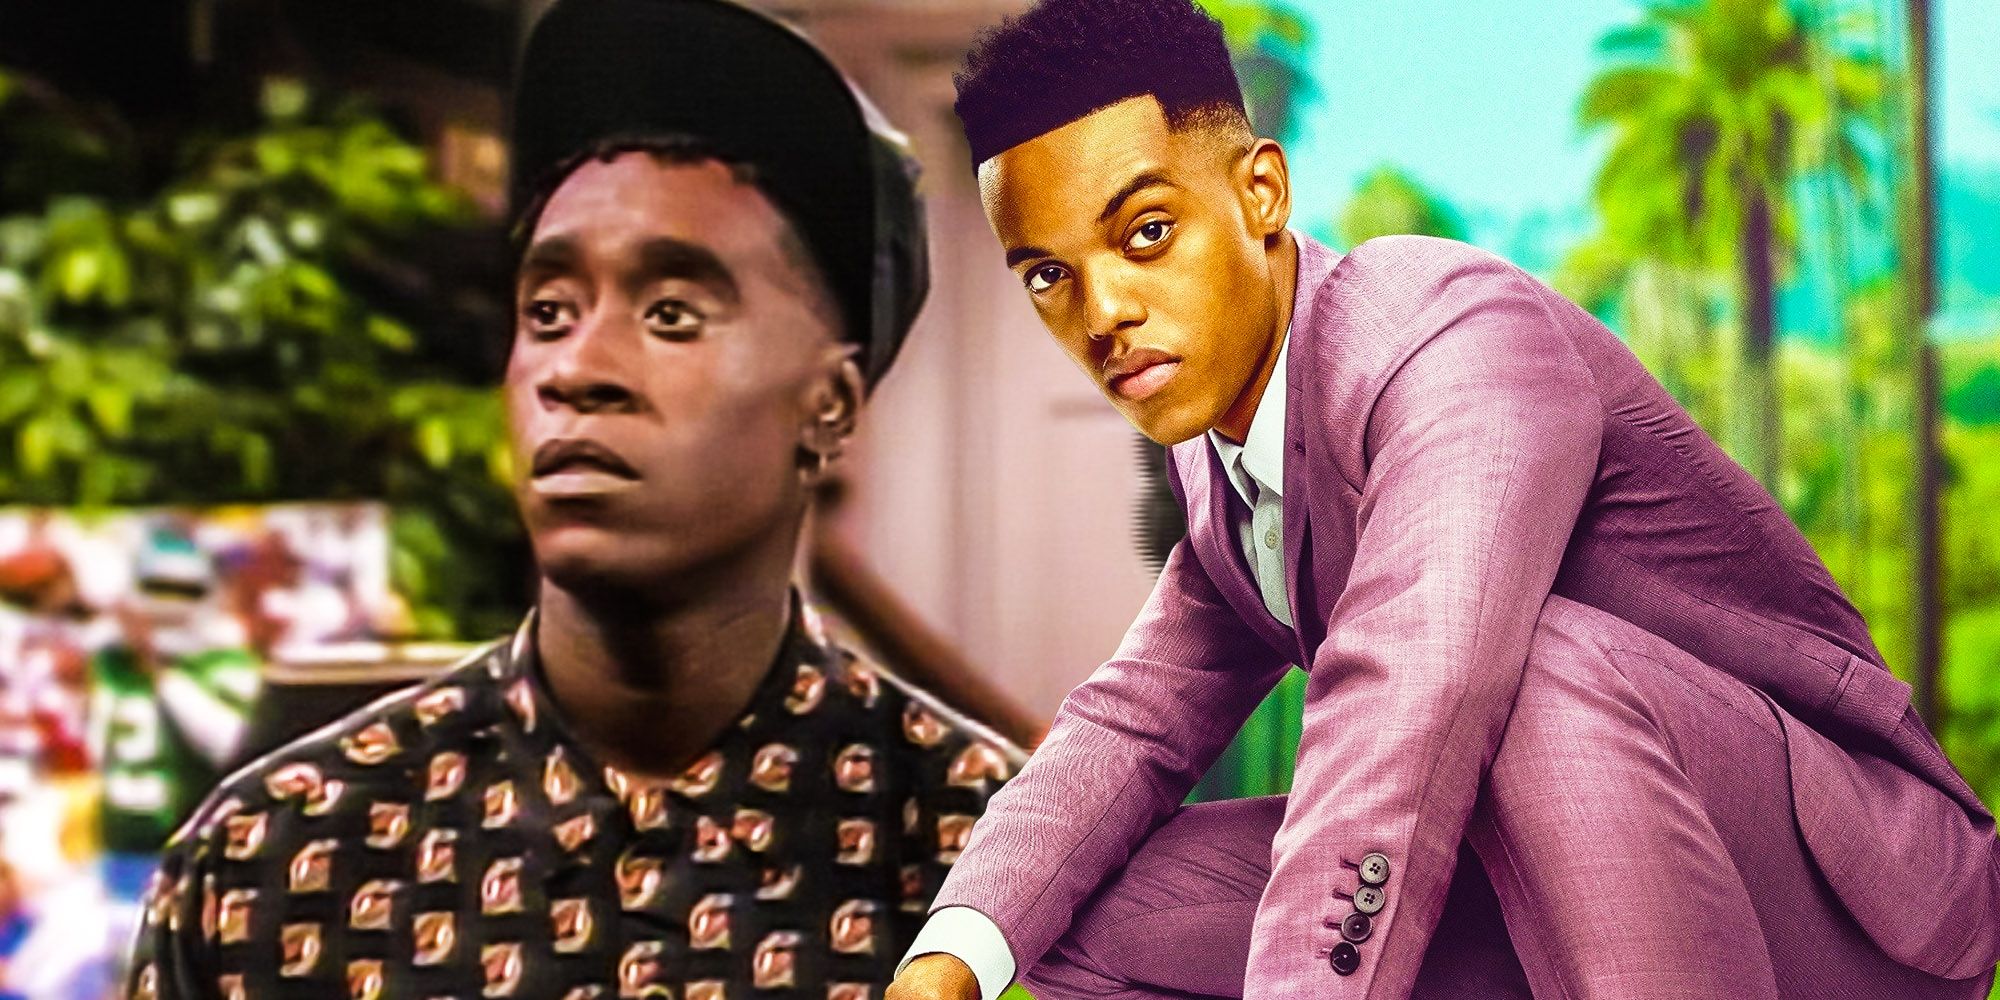 https://static1.srcdn.com/wordpress/wp-content/uploads/2022/03/Fresh-prince-of-bel-air-spinoff-don-cheadle-ice-tray-before-bel-air.jpg